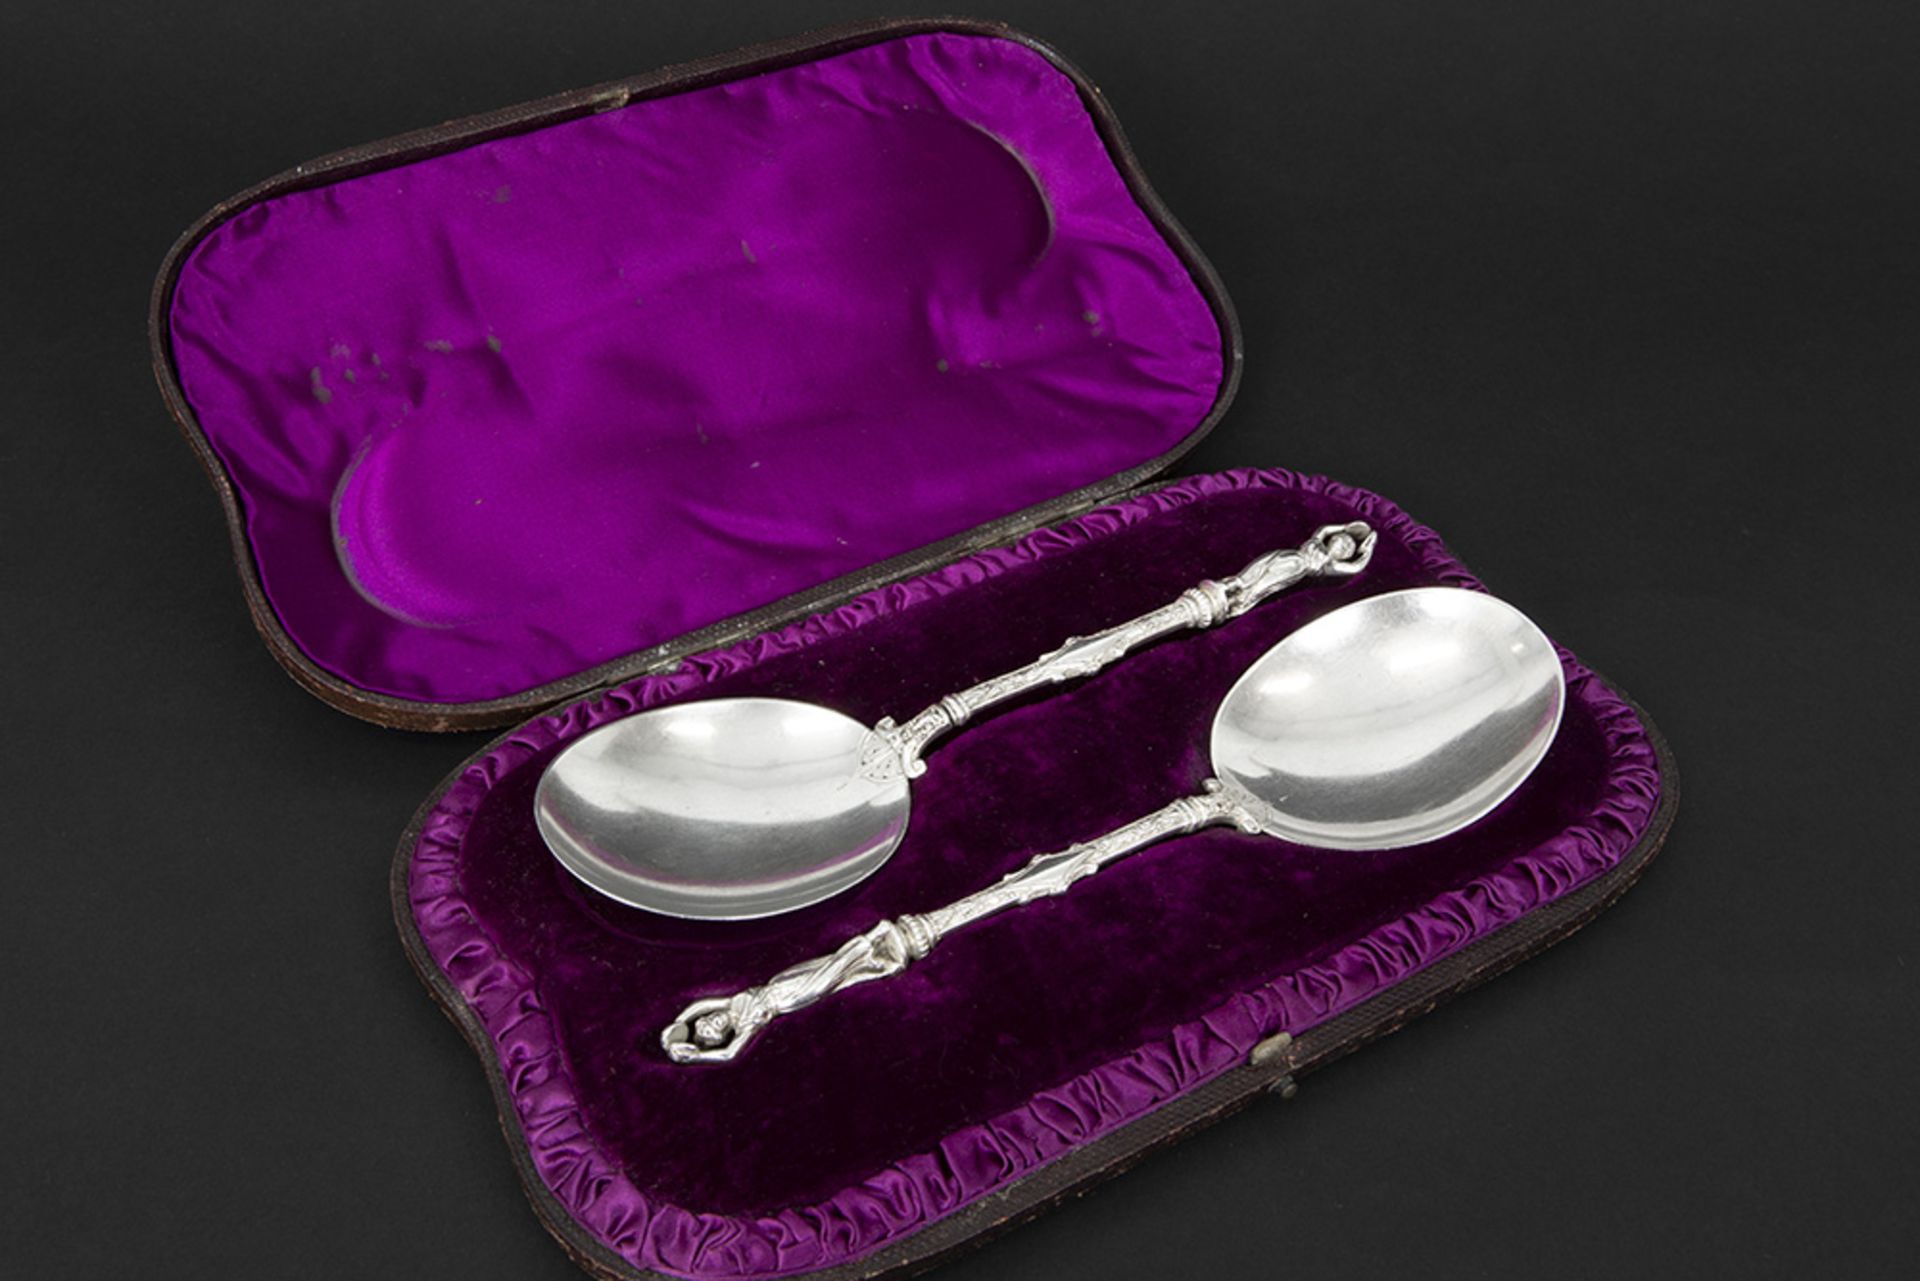 antique set of two serving spoons in Edward Hutton signed and marked silver in their original